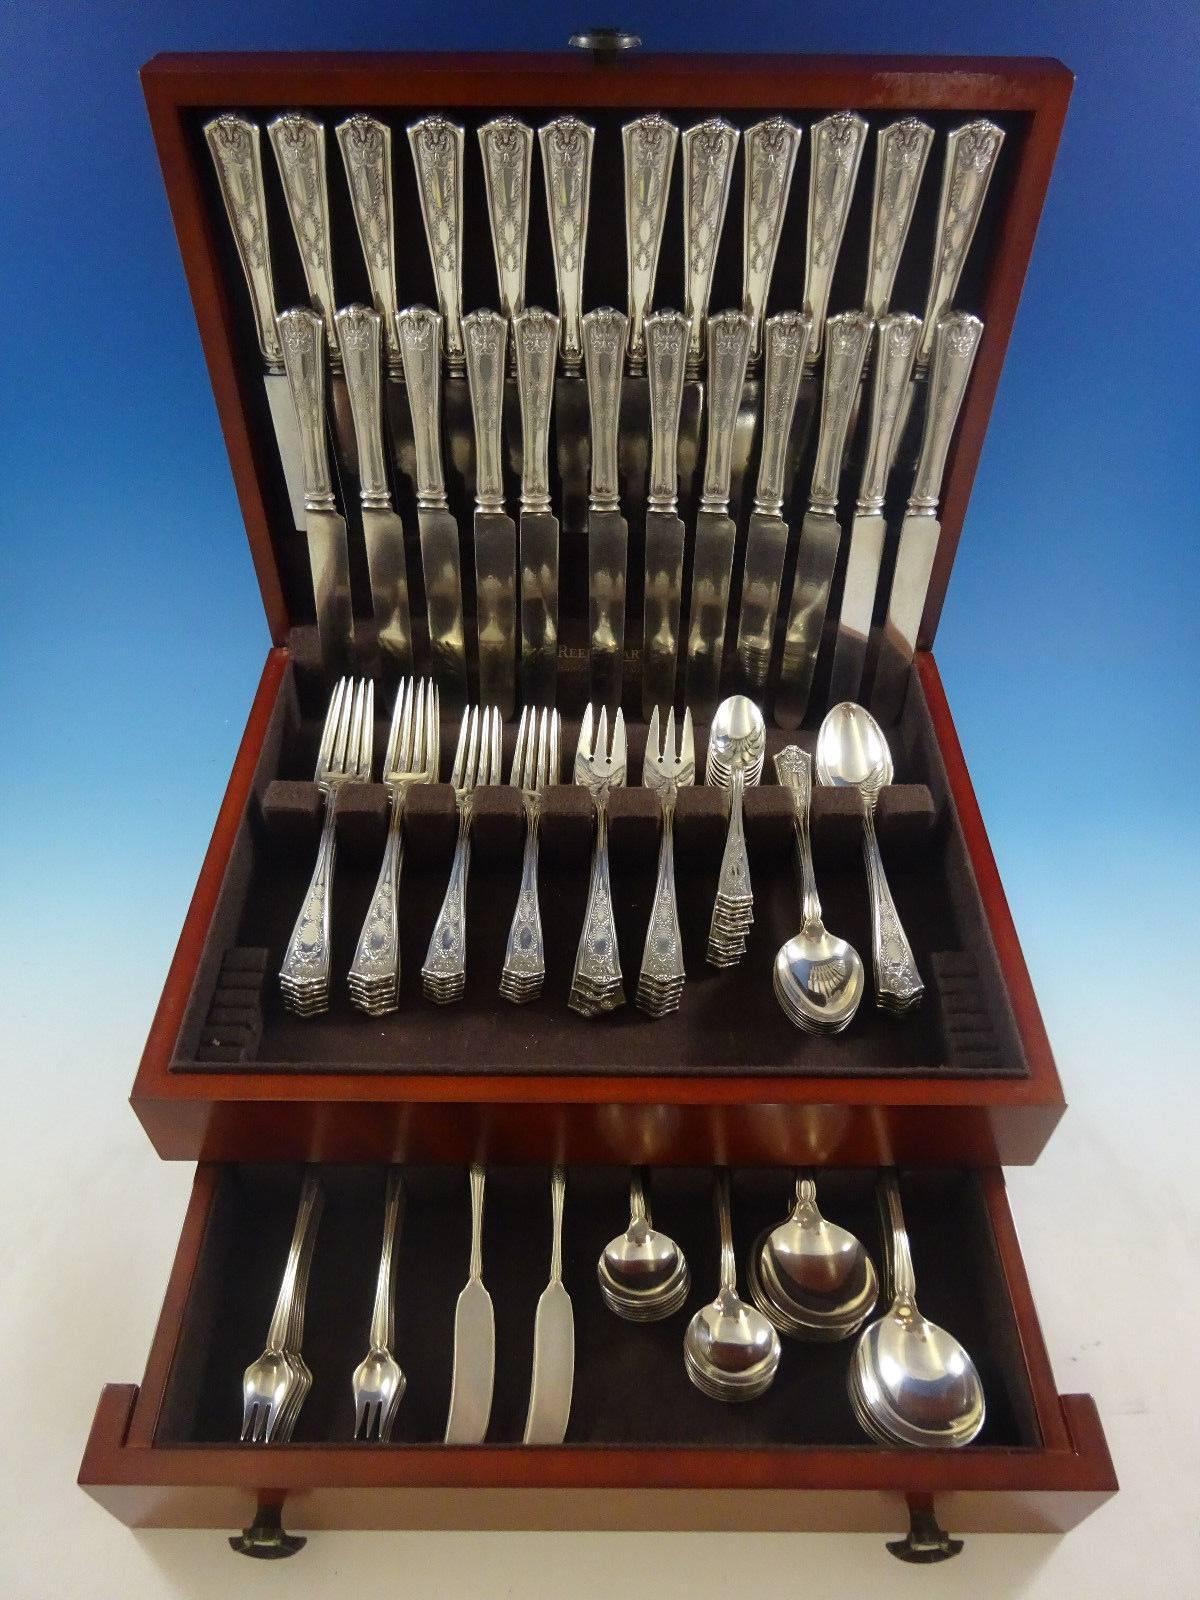 Exceptional Winthrop by Tiffany & Co. sterling silver flatware set of 131 pieces. This set includes: 12 large dinner size knives, 10 1/4